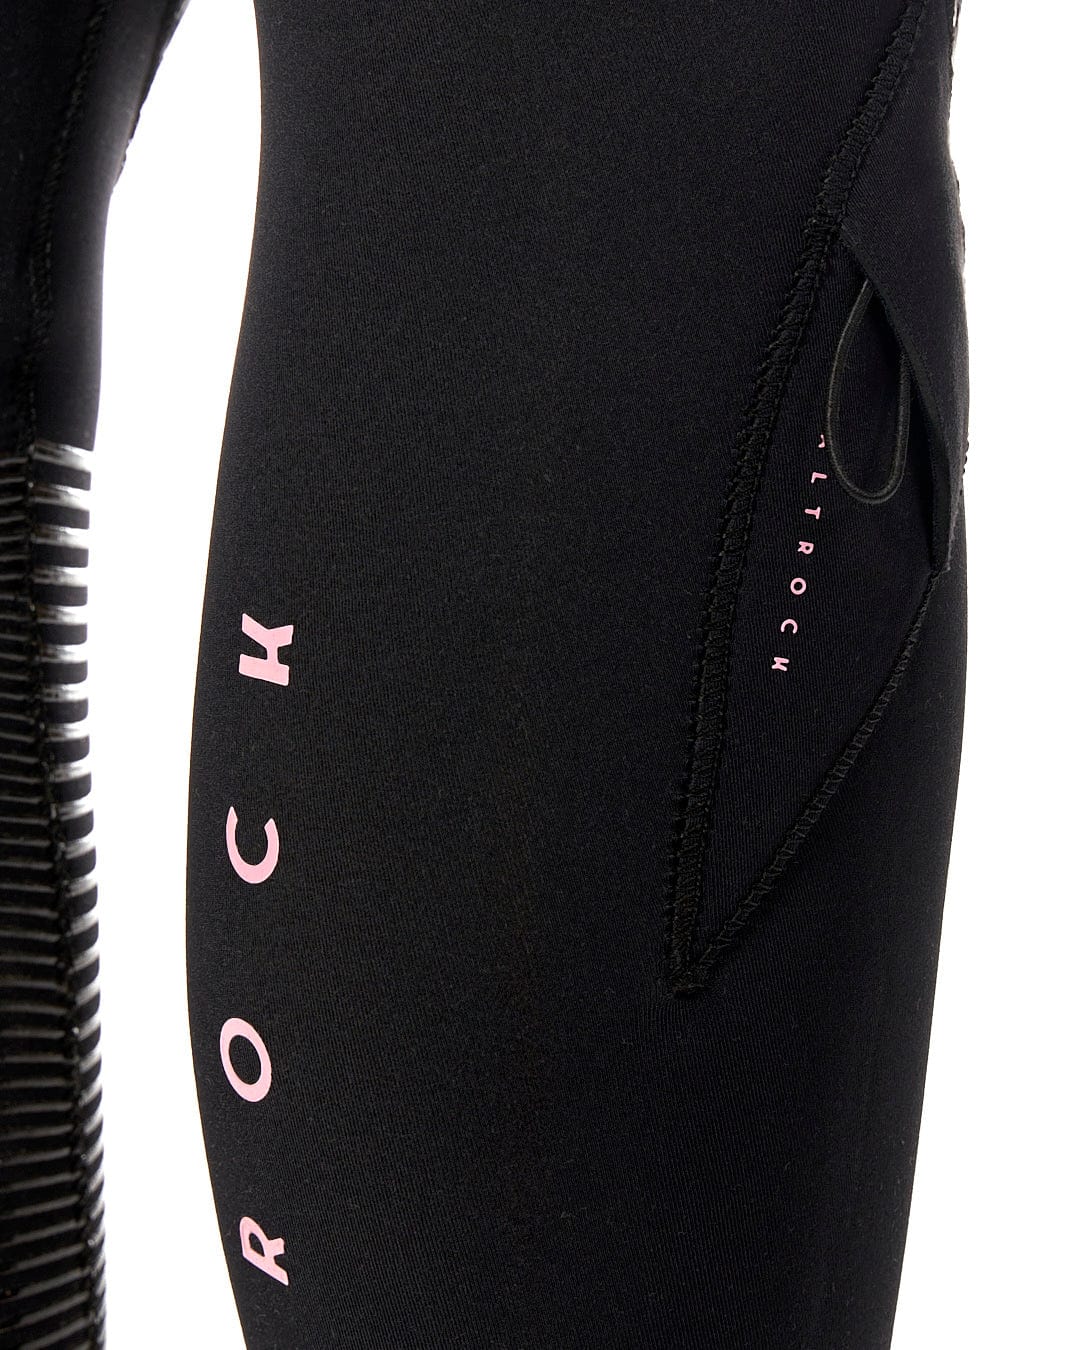 The back of a woman's Shockwave - Womens 3/2 Front Zip Full Wetsuit - Black wetsuit with the Saltrock brand on it.